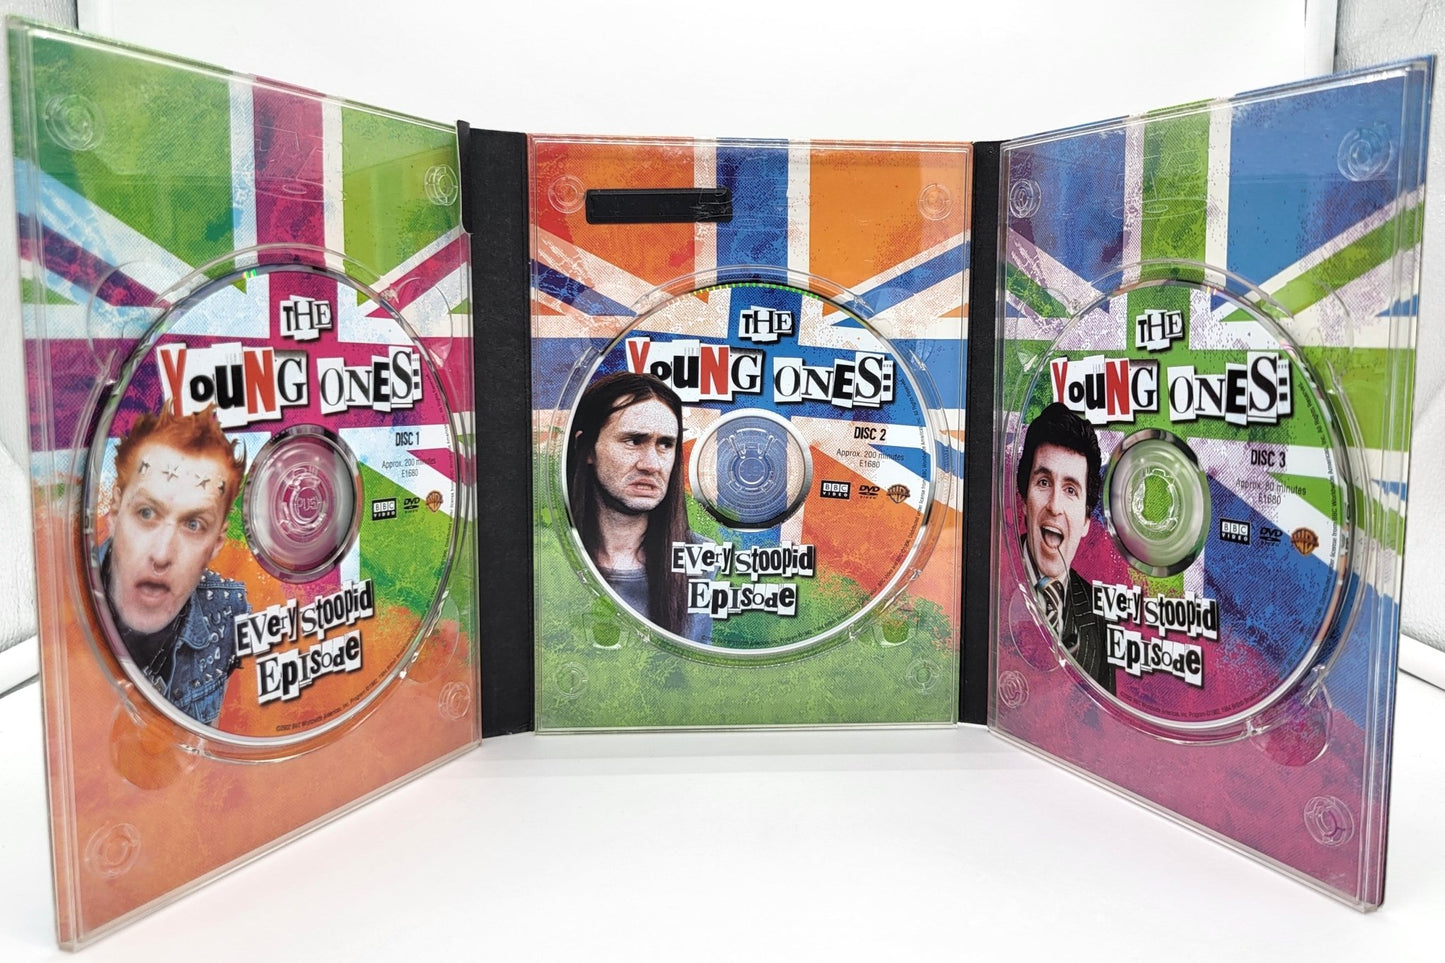 BBC Video - The Young Ones - Every Stoopid Episode | DVD - DVD - Steady Bunny Shop